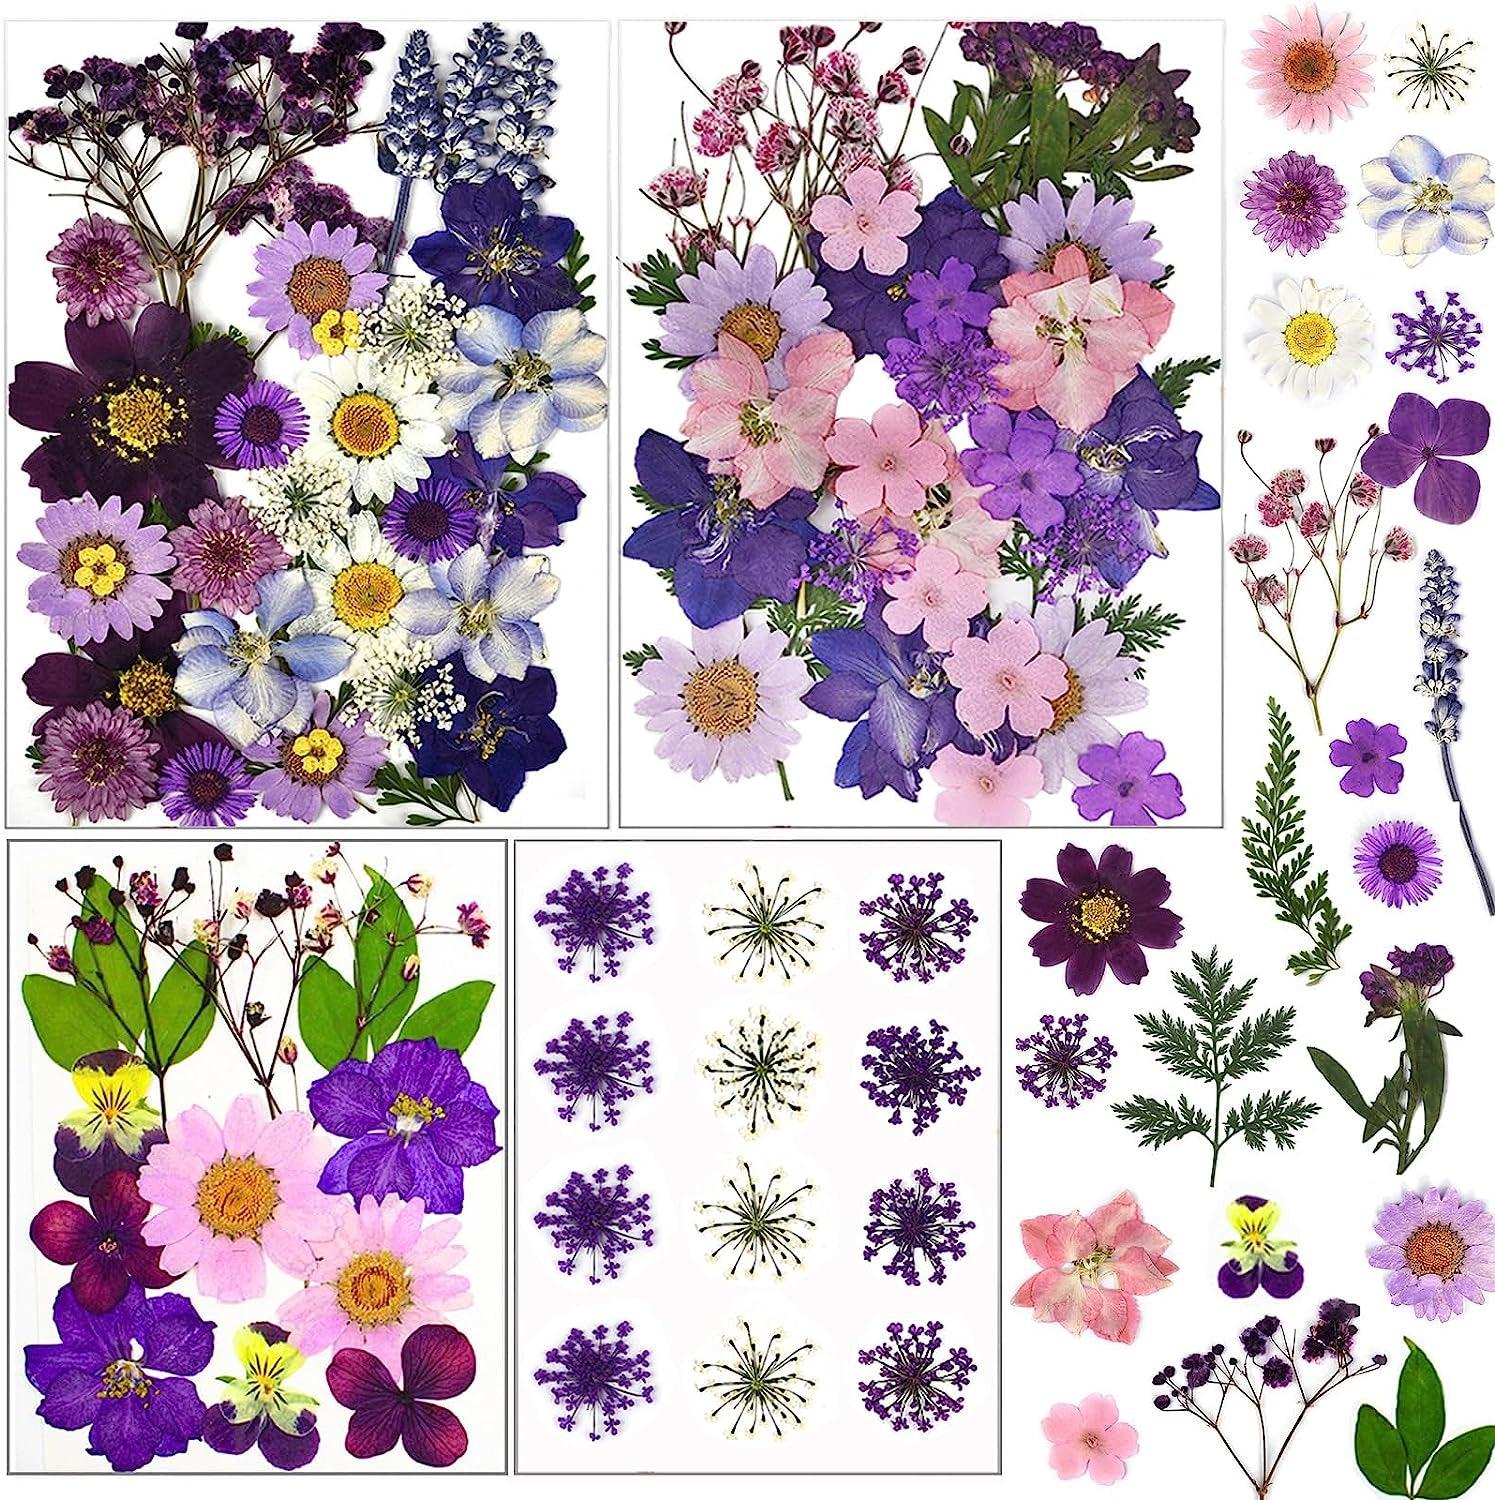 92 Pcs Purple Dried Pressed Flowers Real Natural Leave Petals for